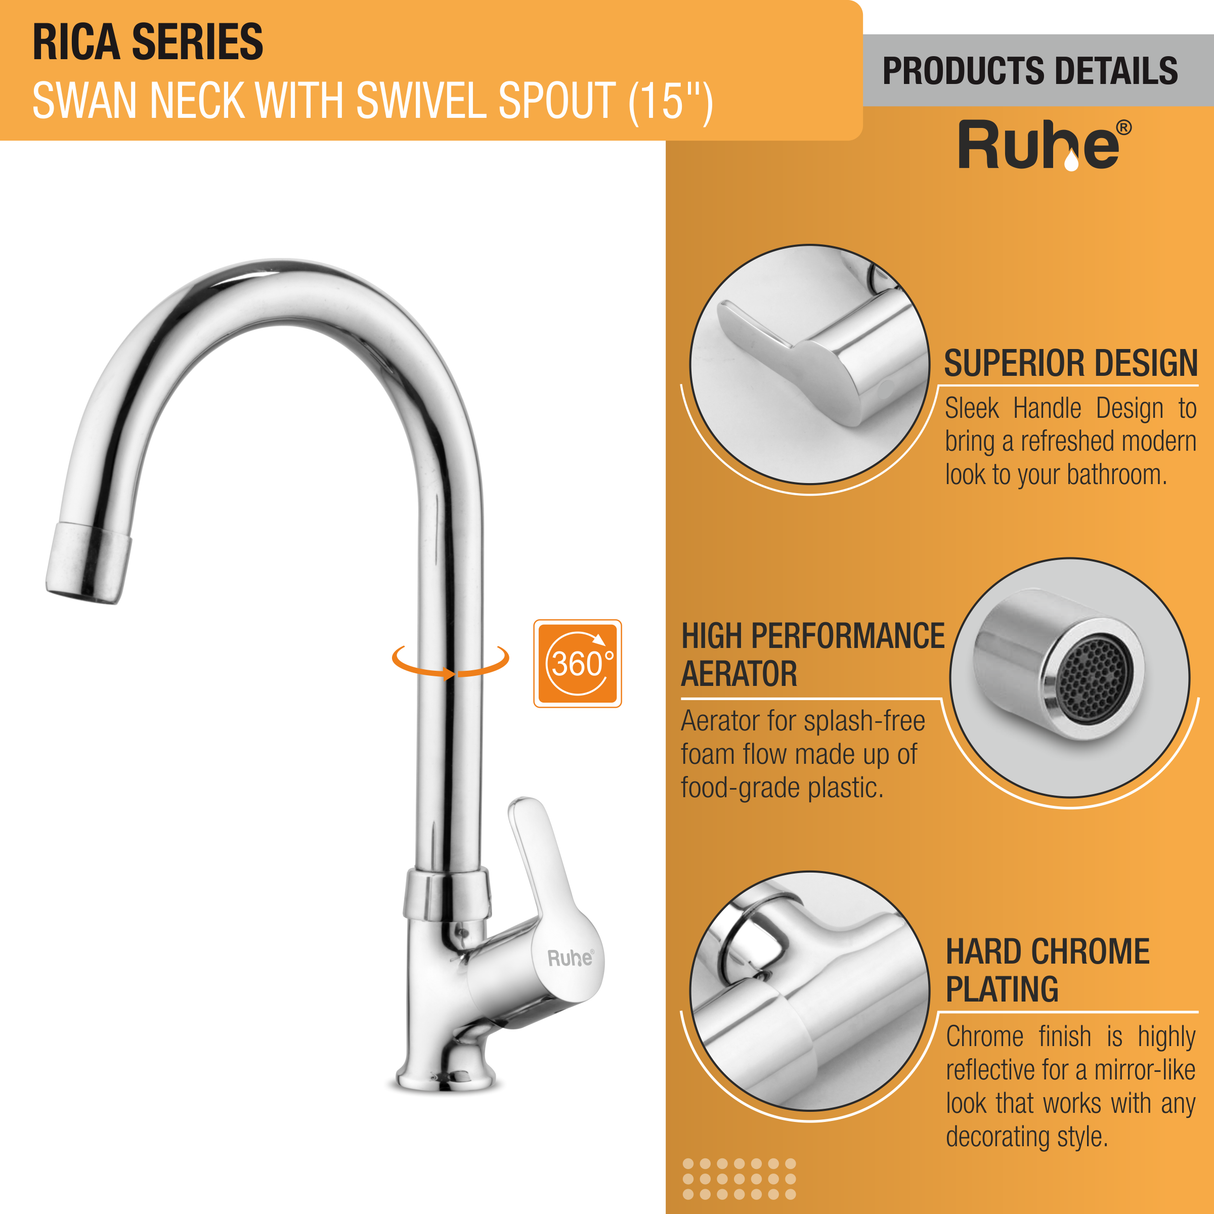 Rica Swan Neck with Medium (15 inches) Round Swivel Spout Faucet details